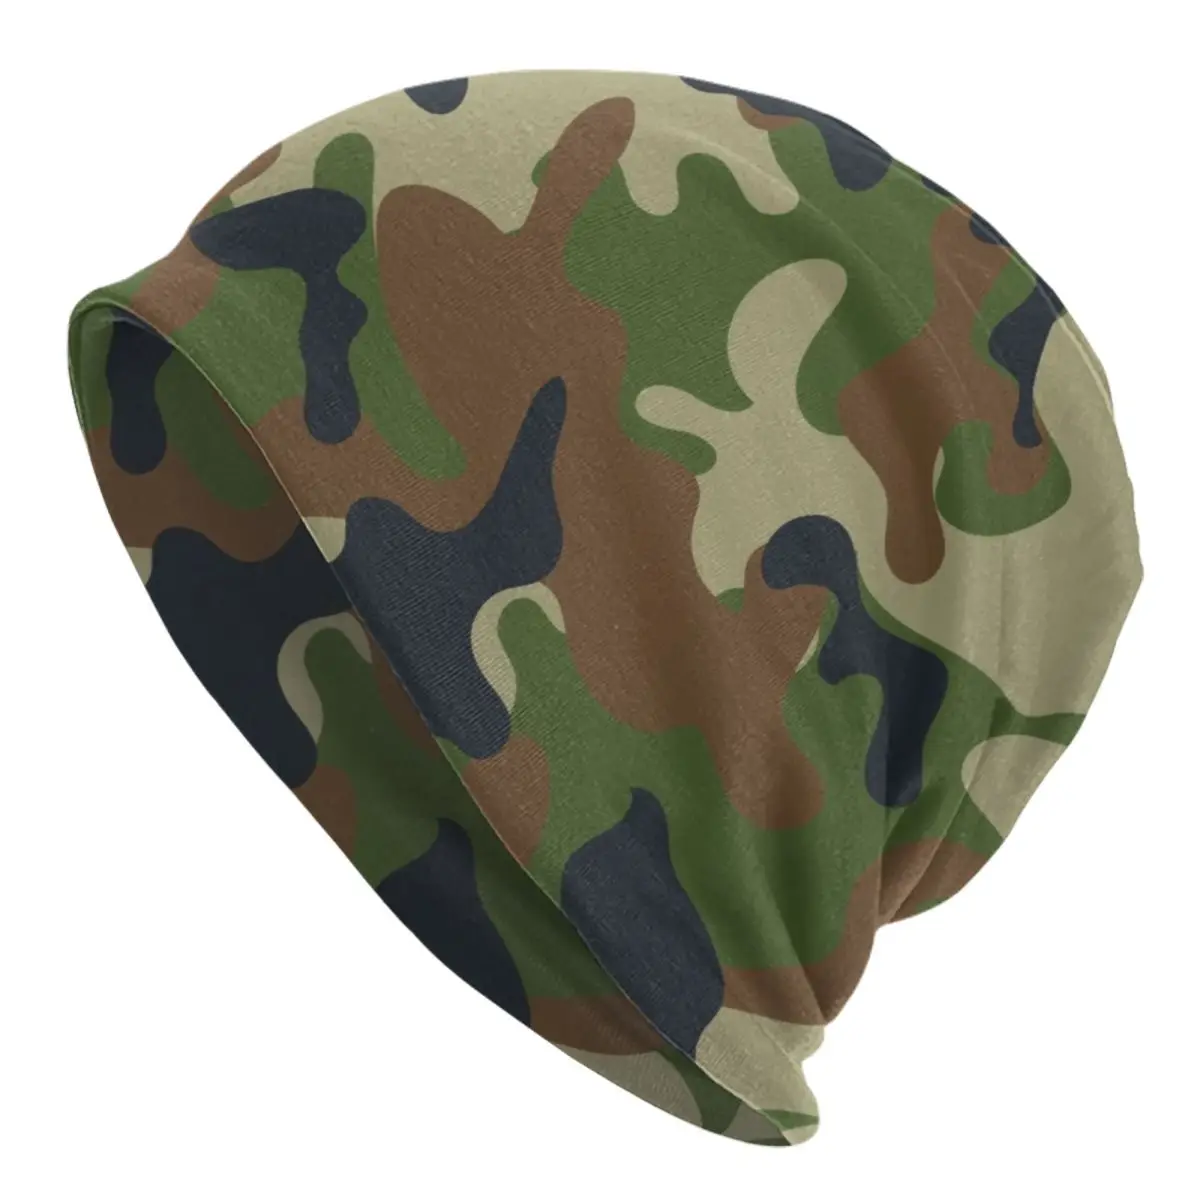 

Woodland Camouflage Skullies Beanies Caps Winter Warm Knitting Hat Hip Hop Adult Military Army Camo Bonnet Hats Outdoor Ski Cap